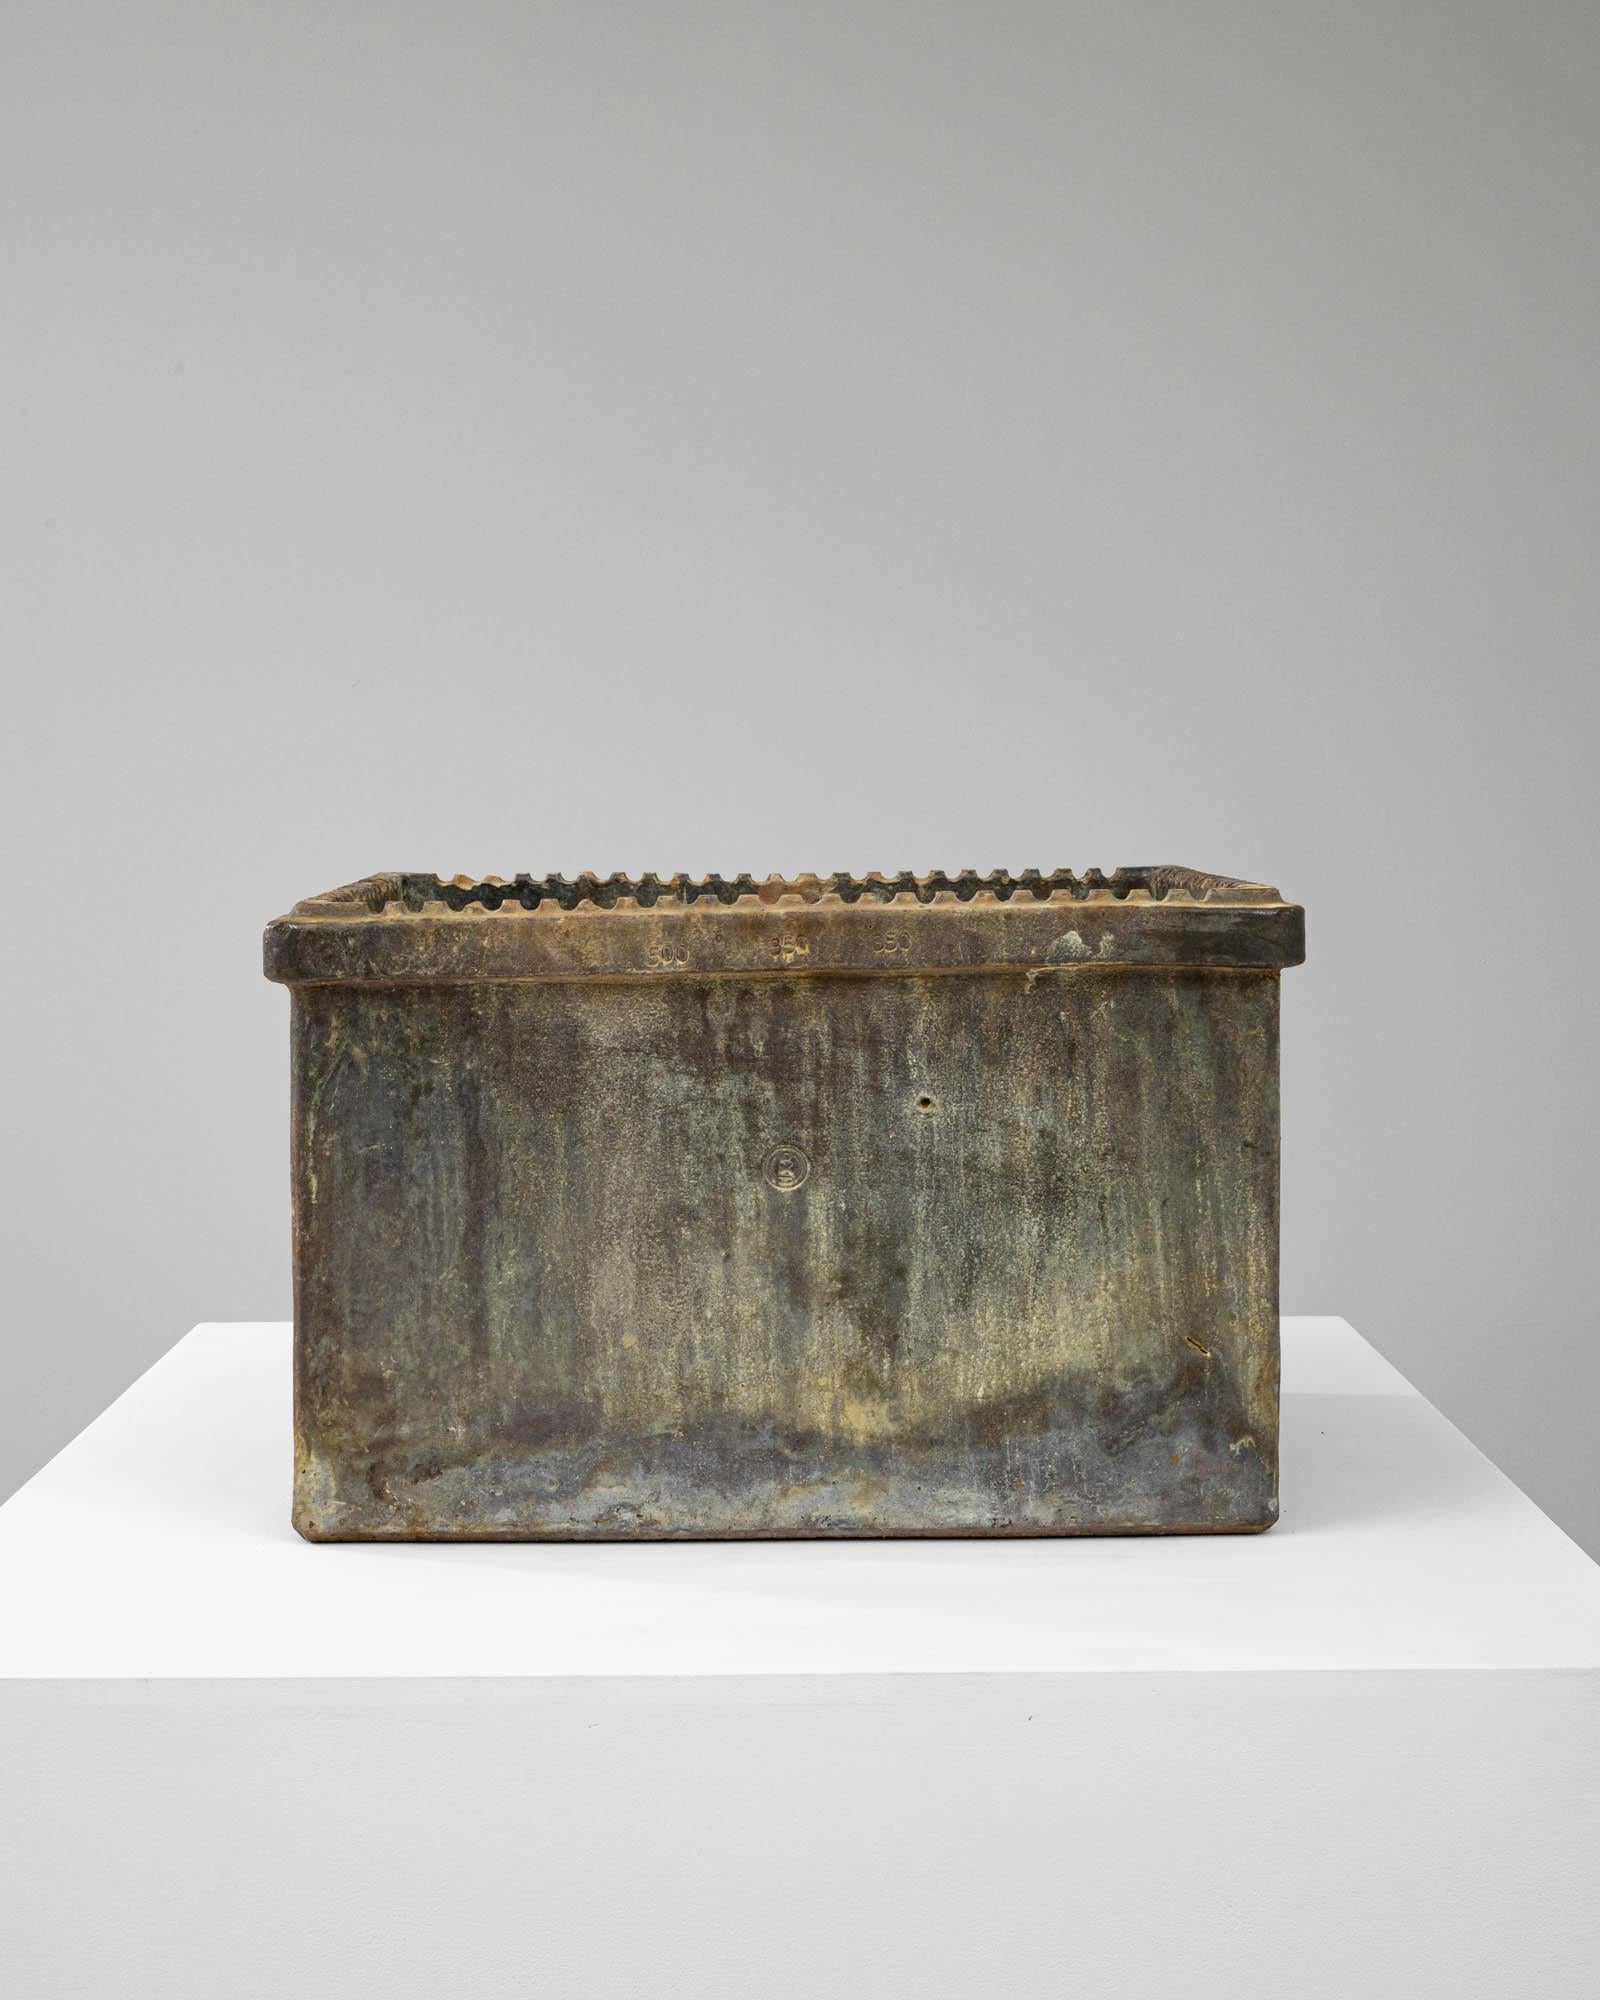 This 20th-century Belgian ceramic planter is a masterpiece of rustic charm and understated elegance. Rectangular in shape, it is adorned with a richly textured rim that offers a tactile contrast to its smoothly worn sides. The patina, a complex